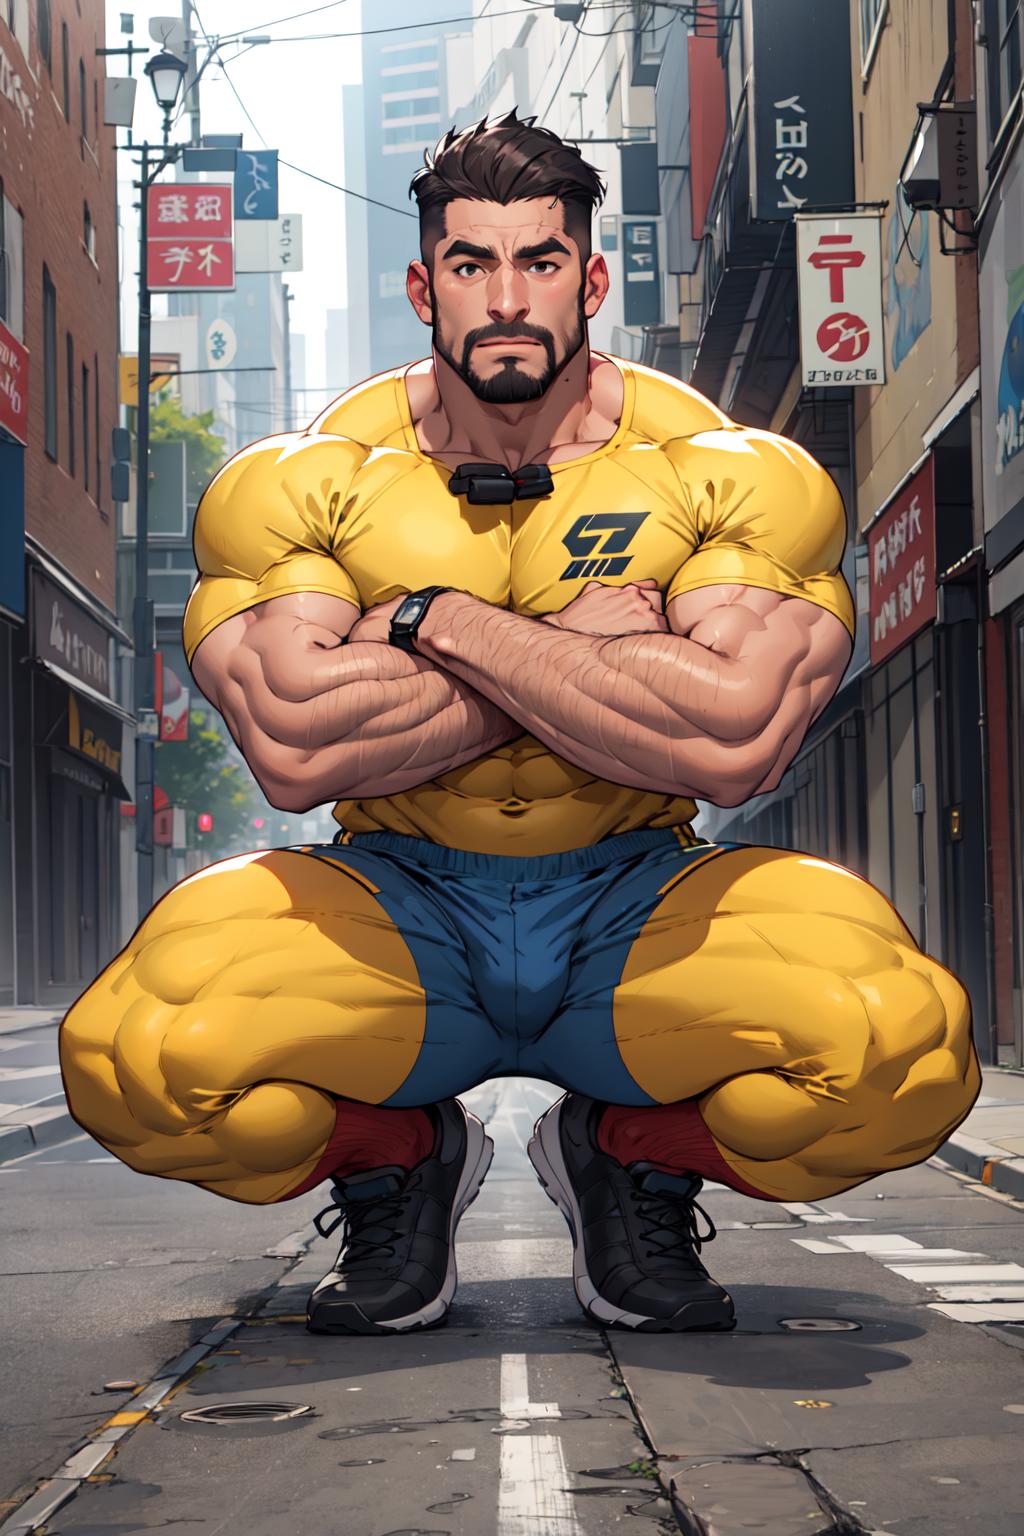 A man wearing a yellow shirt and yellow pants with a yellow belt is sitting on the street.